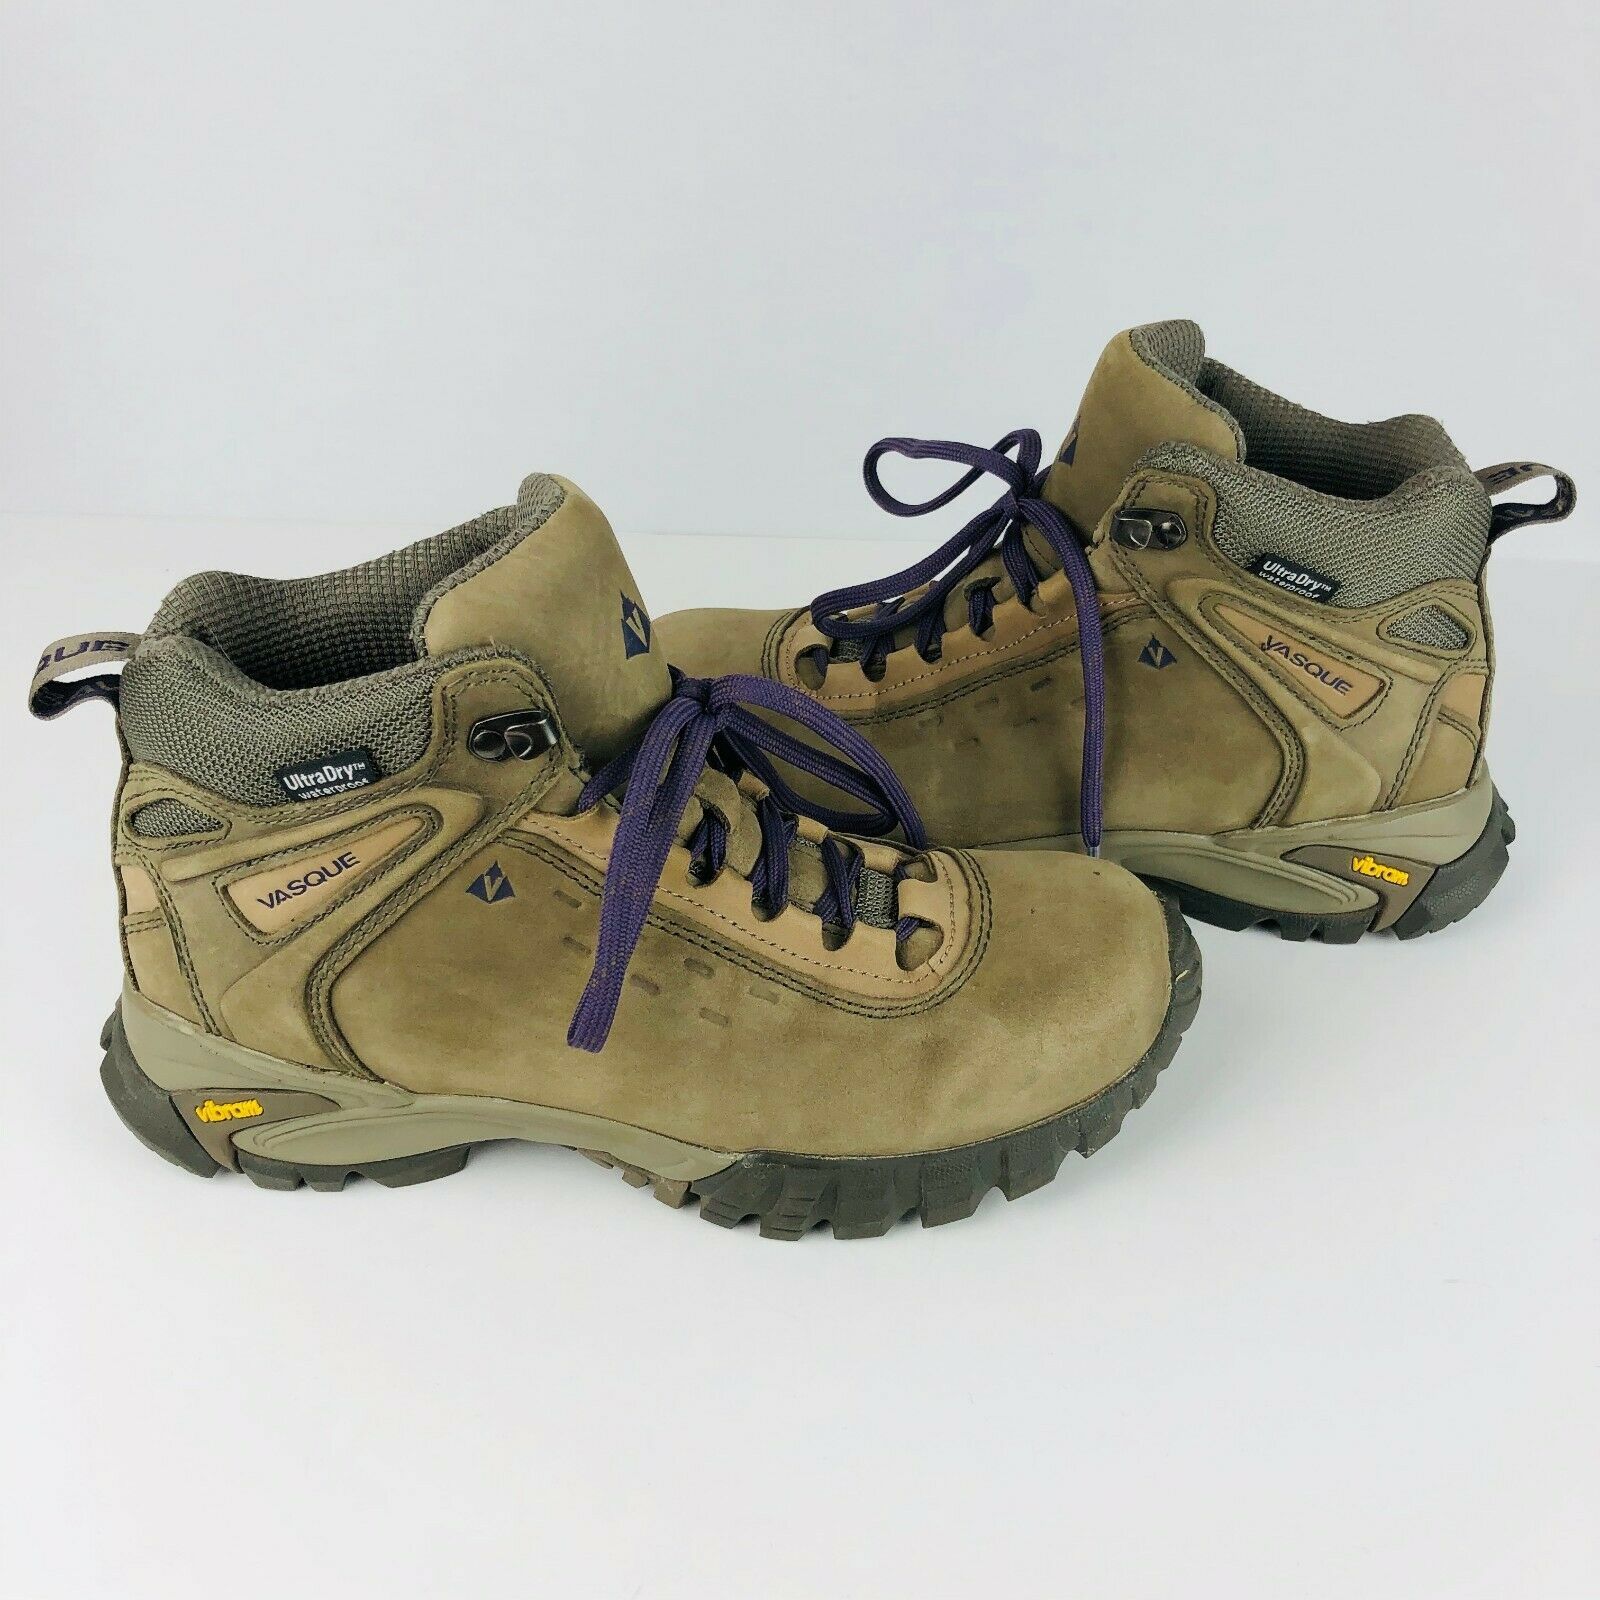 Vasque Womens Talus Mid Ultra Dry Hiking Boots 8.5 Nubuck Leather Tie ...